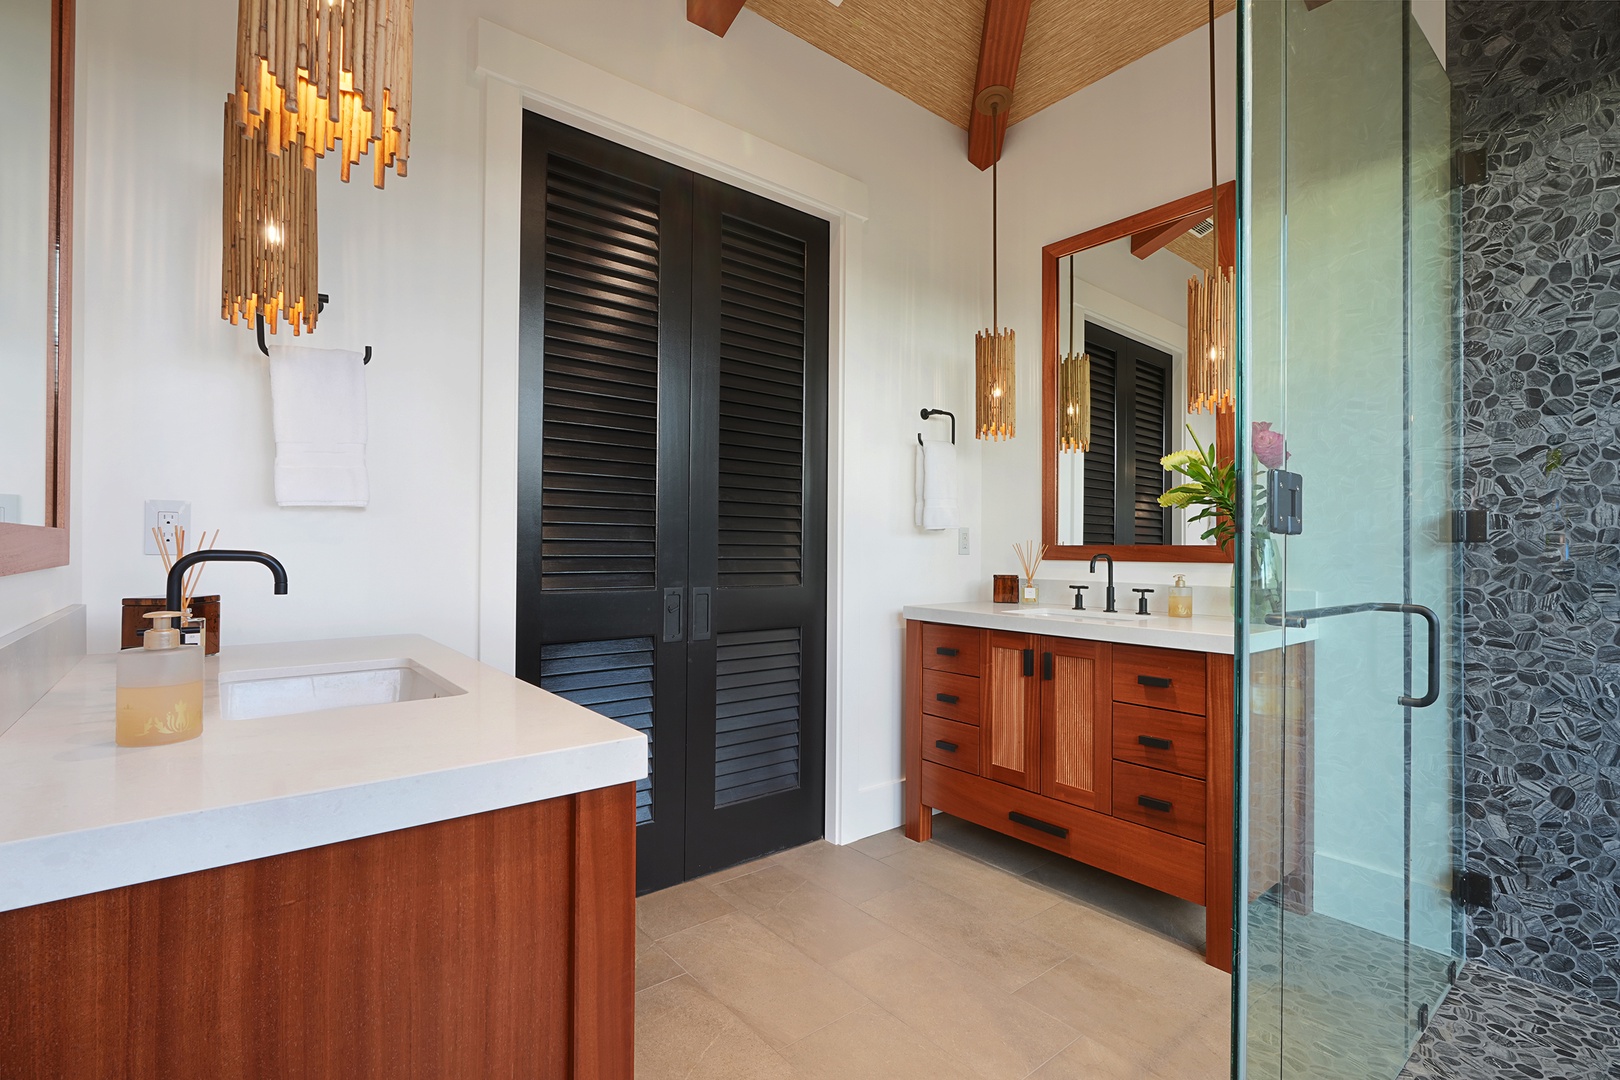 Koloa Vacation Rentals, Hale Pakika at Kukui'ula - Primary ensuite with dual vanity space and walk in shower is a private retreat..